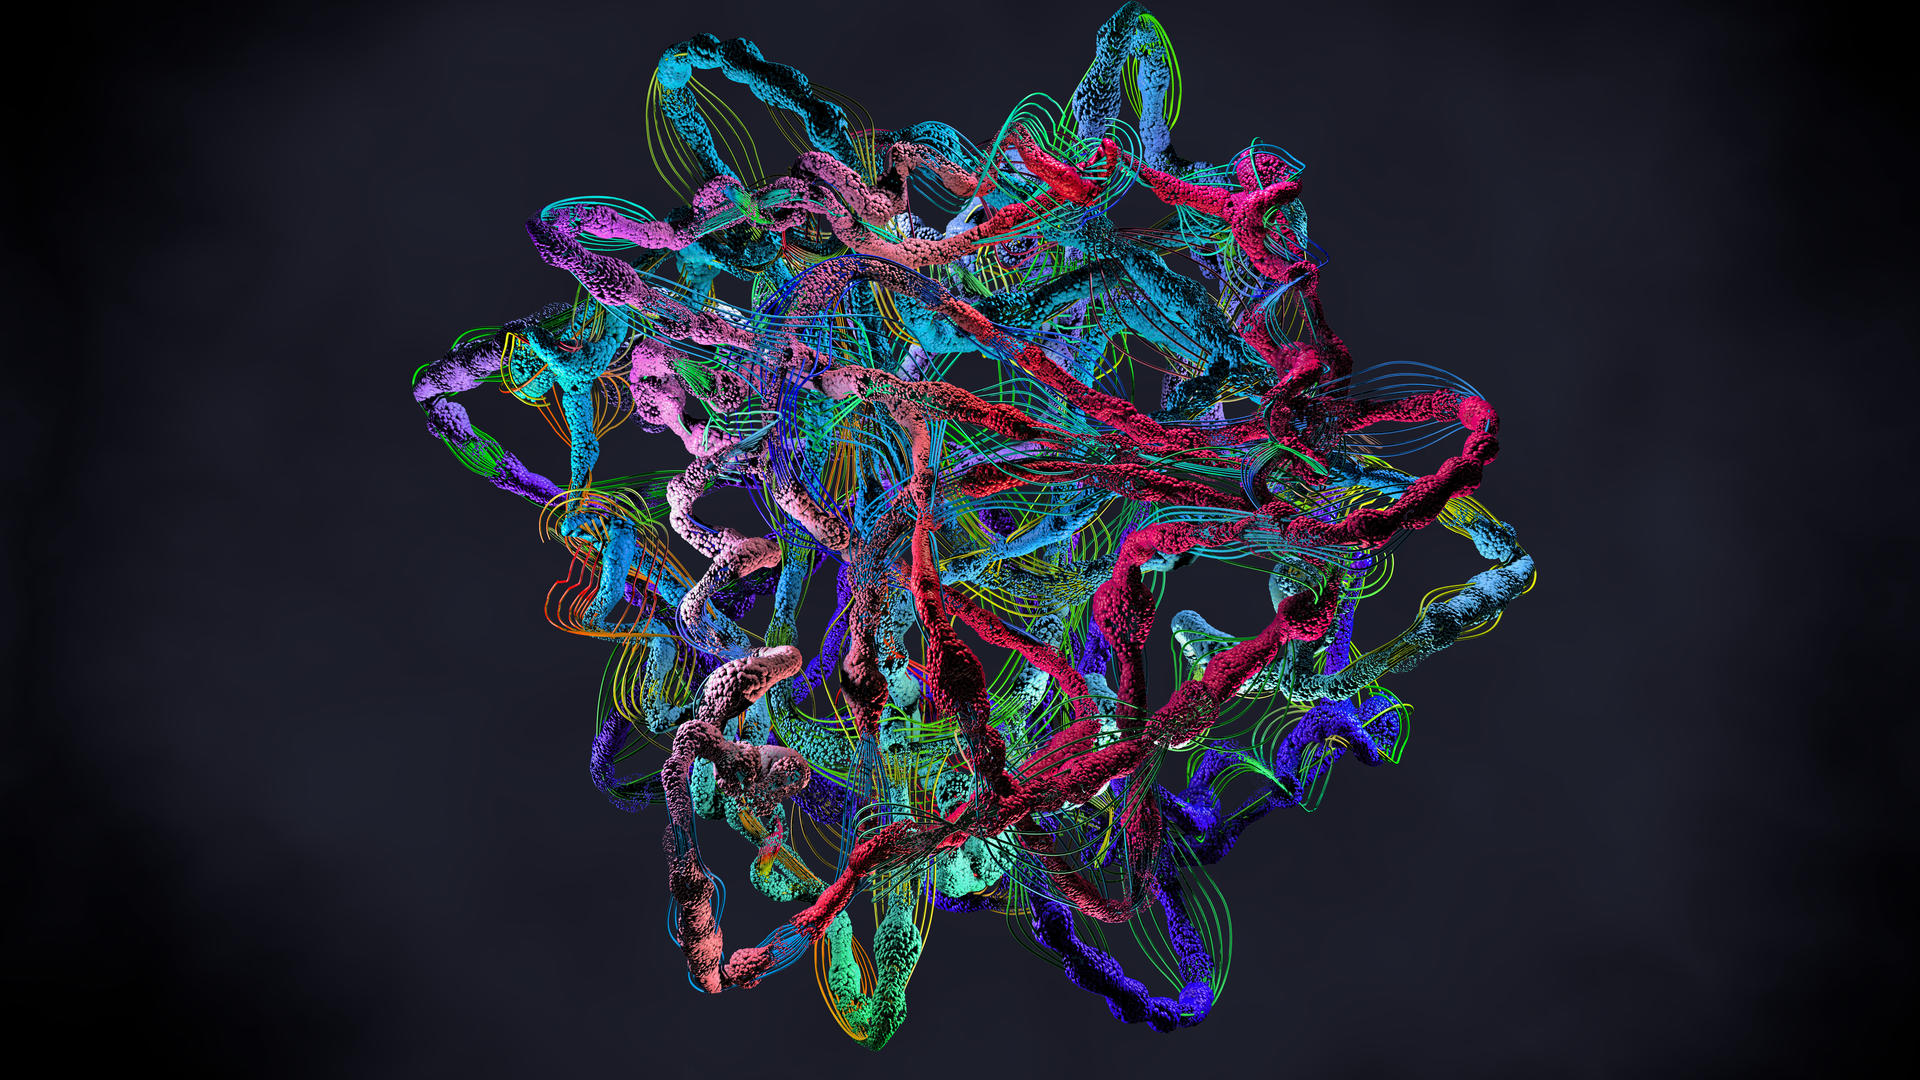 3D illustration of a fully-folded protein. ​​​​​Credit: Christoph Burgstedt/iStock/Getty Images Plus